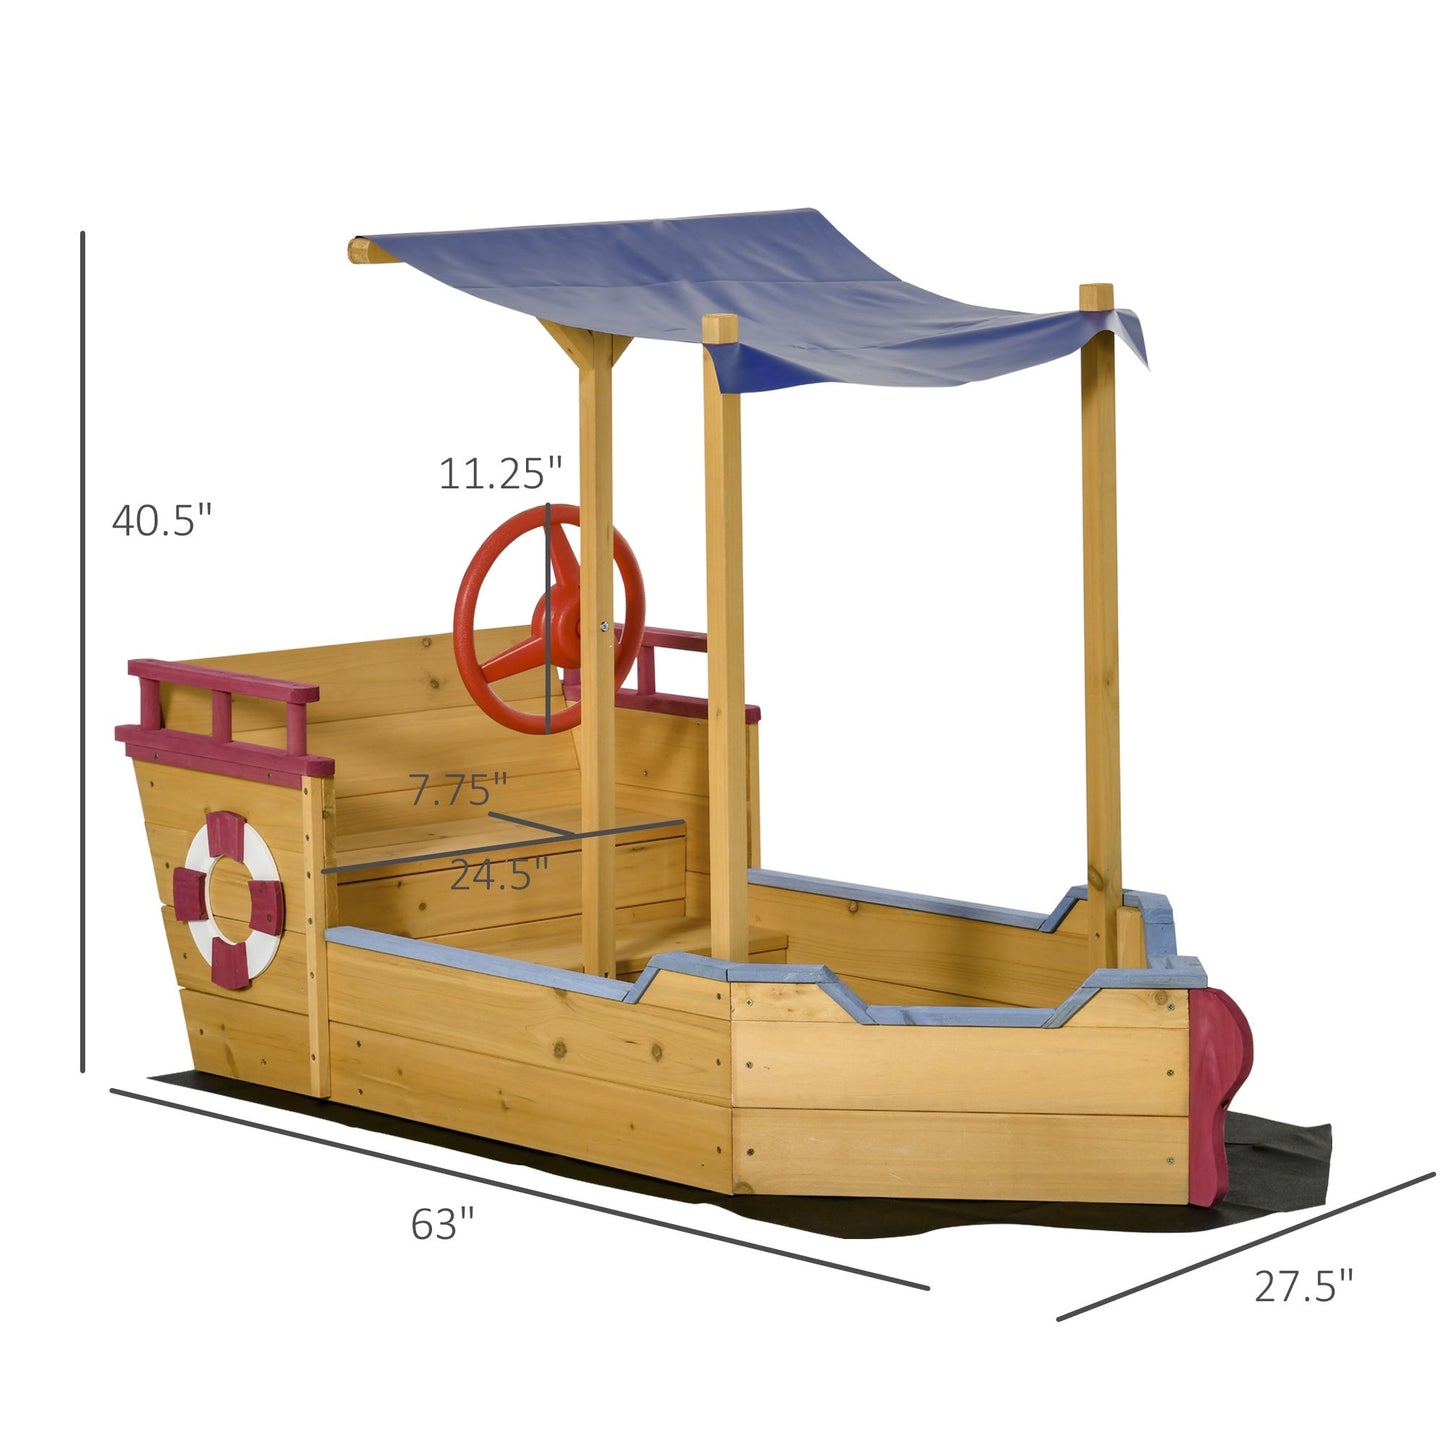 Toys and Games-Pirate Ship Wooden Sandbox Covered Children Sand boat Outdoor, with Storage Bench, Sun Protective Canopy Cover, Ages 3-8 Years Old, Orange - Outdoor Style Company